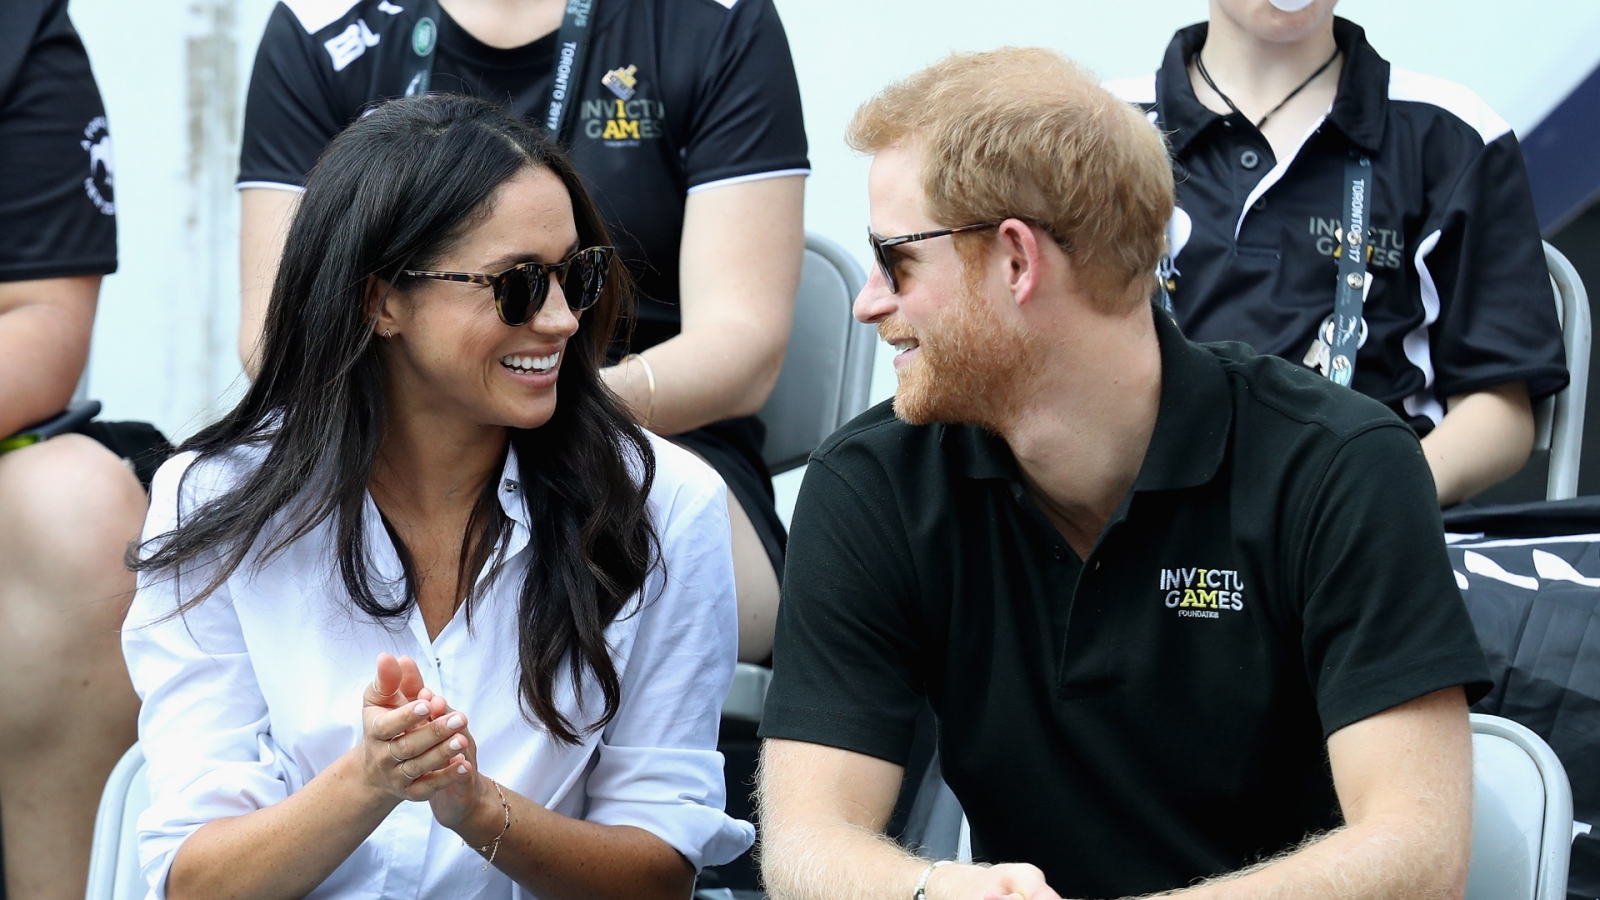 Twitter is sick of Prince Harry and Meghan Markle s 